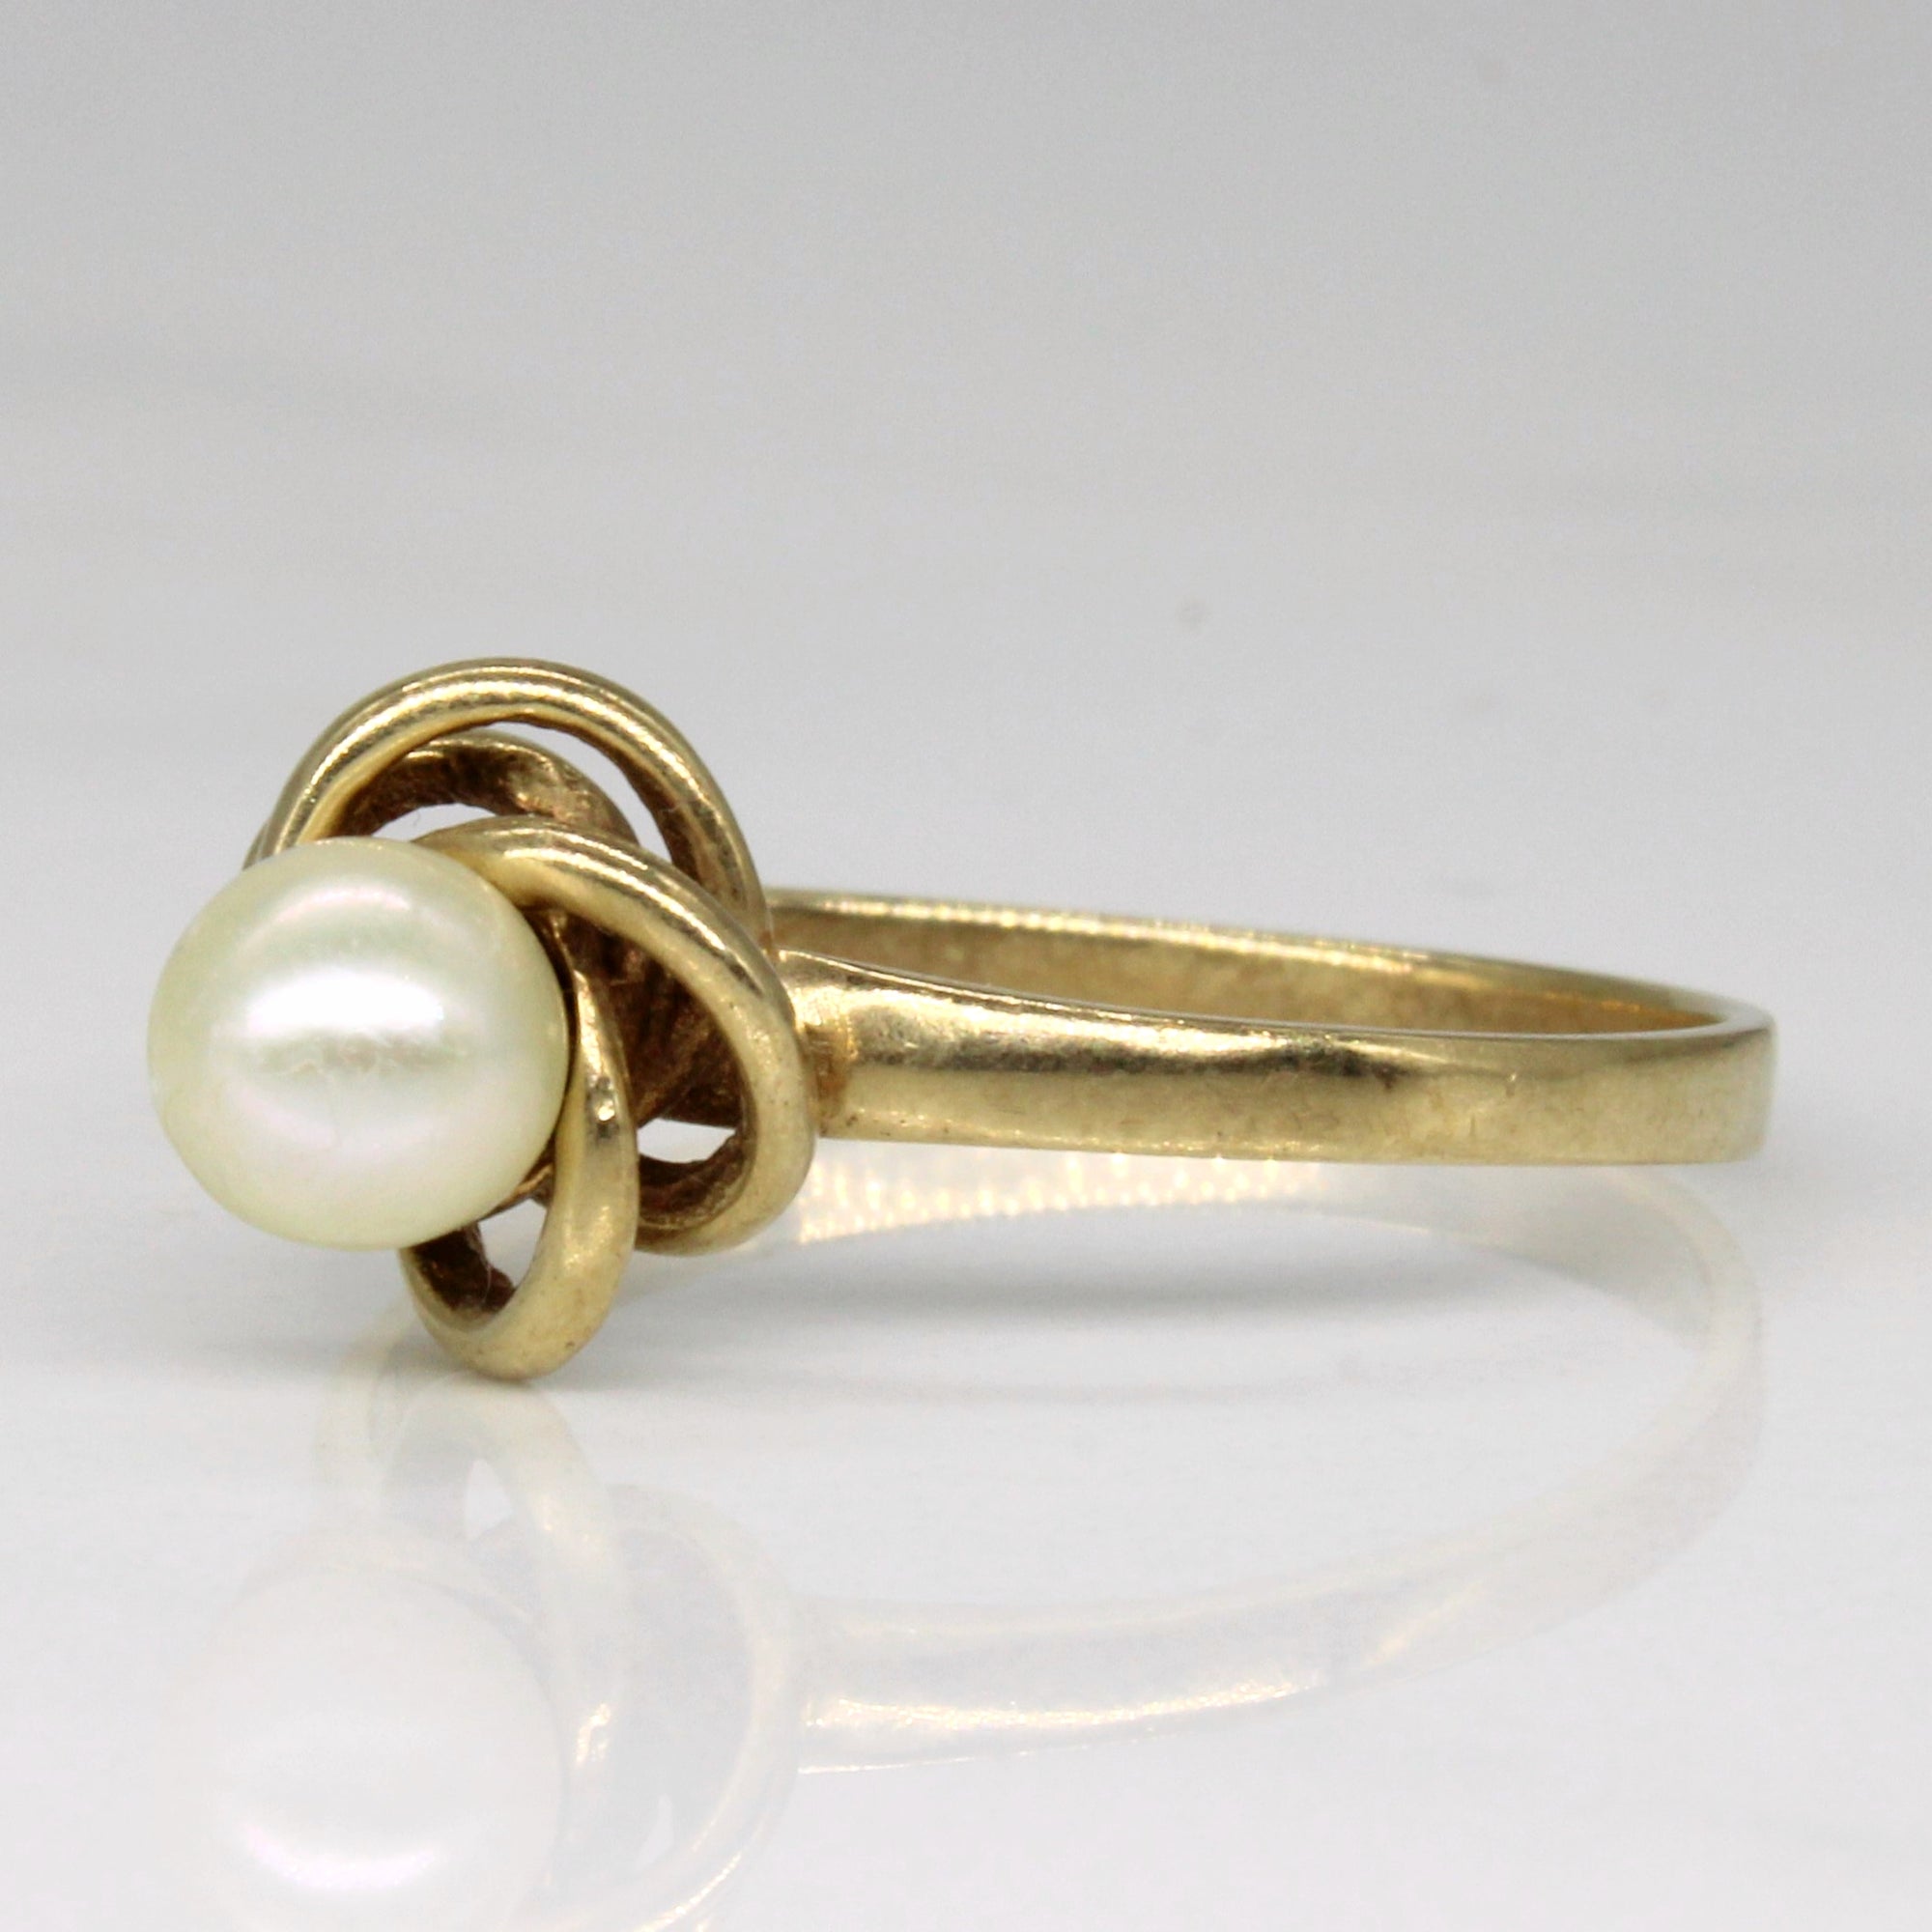 Pearl Knot Ring | SZ 7.25 |